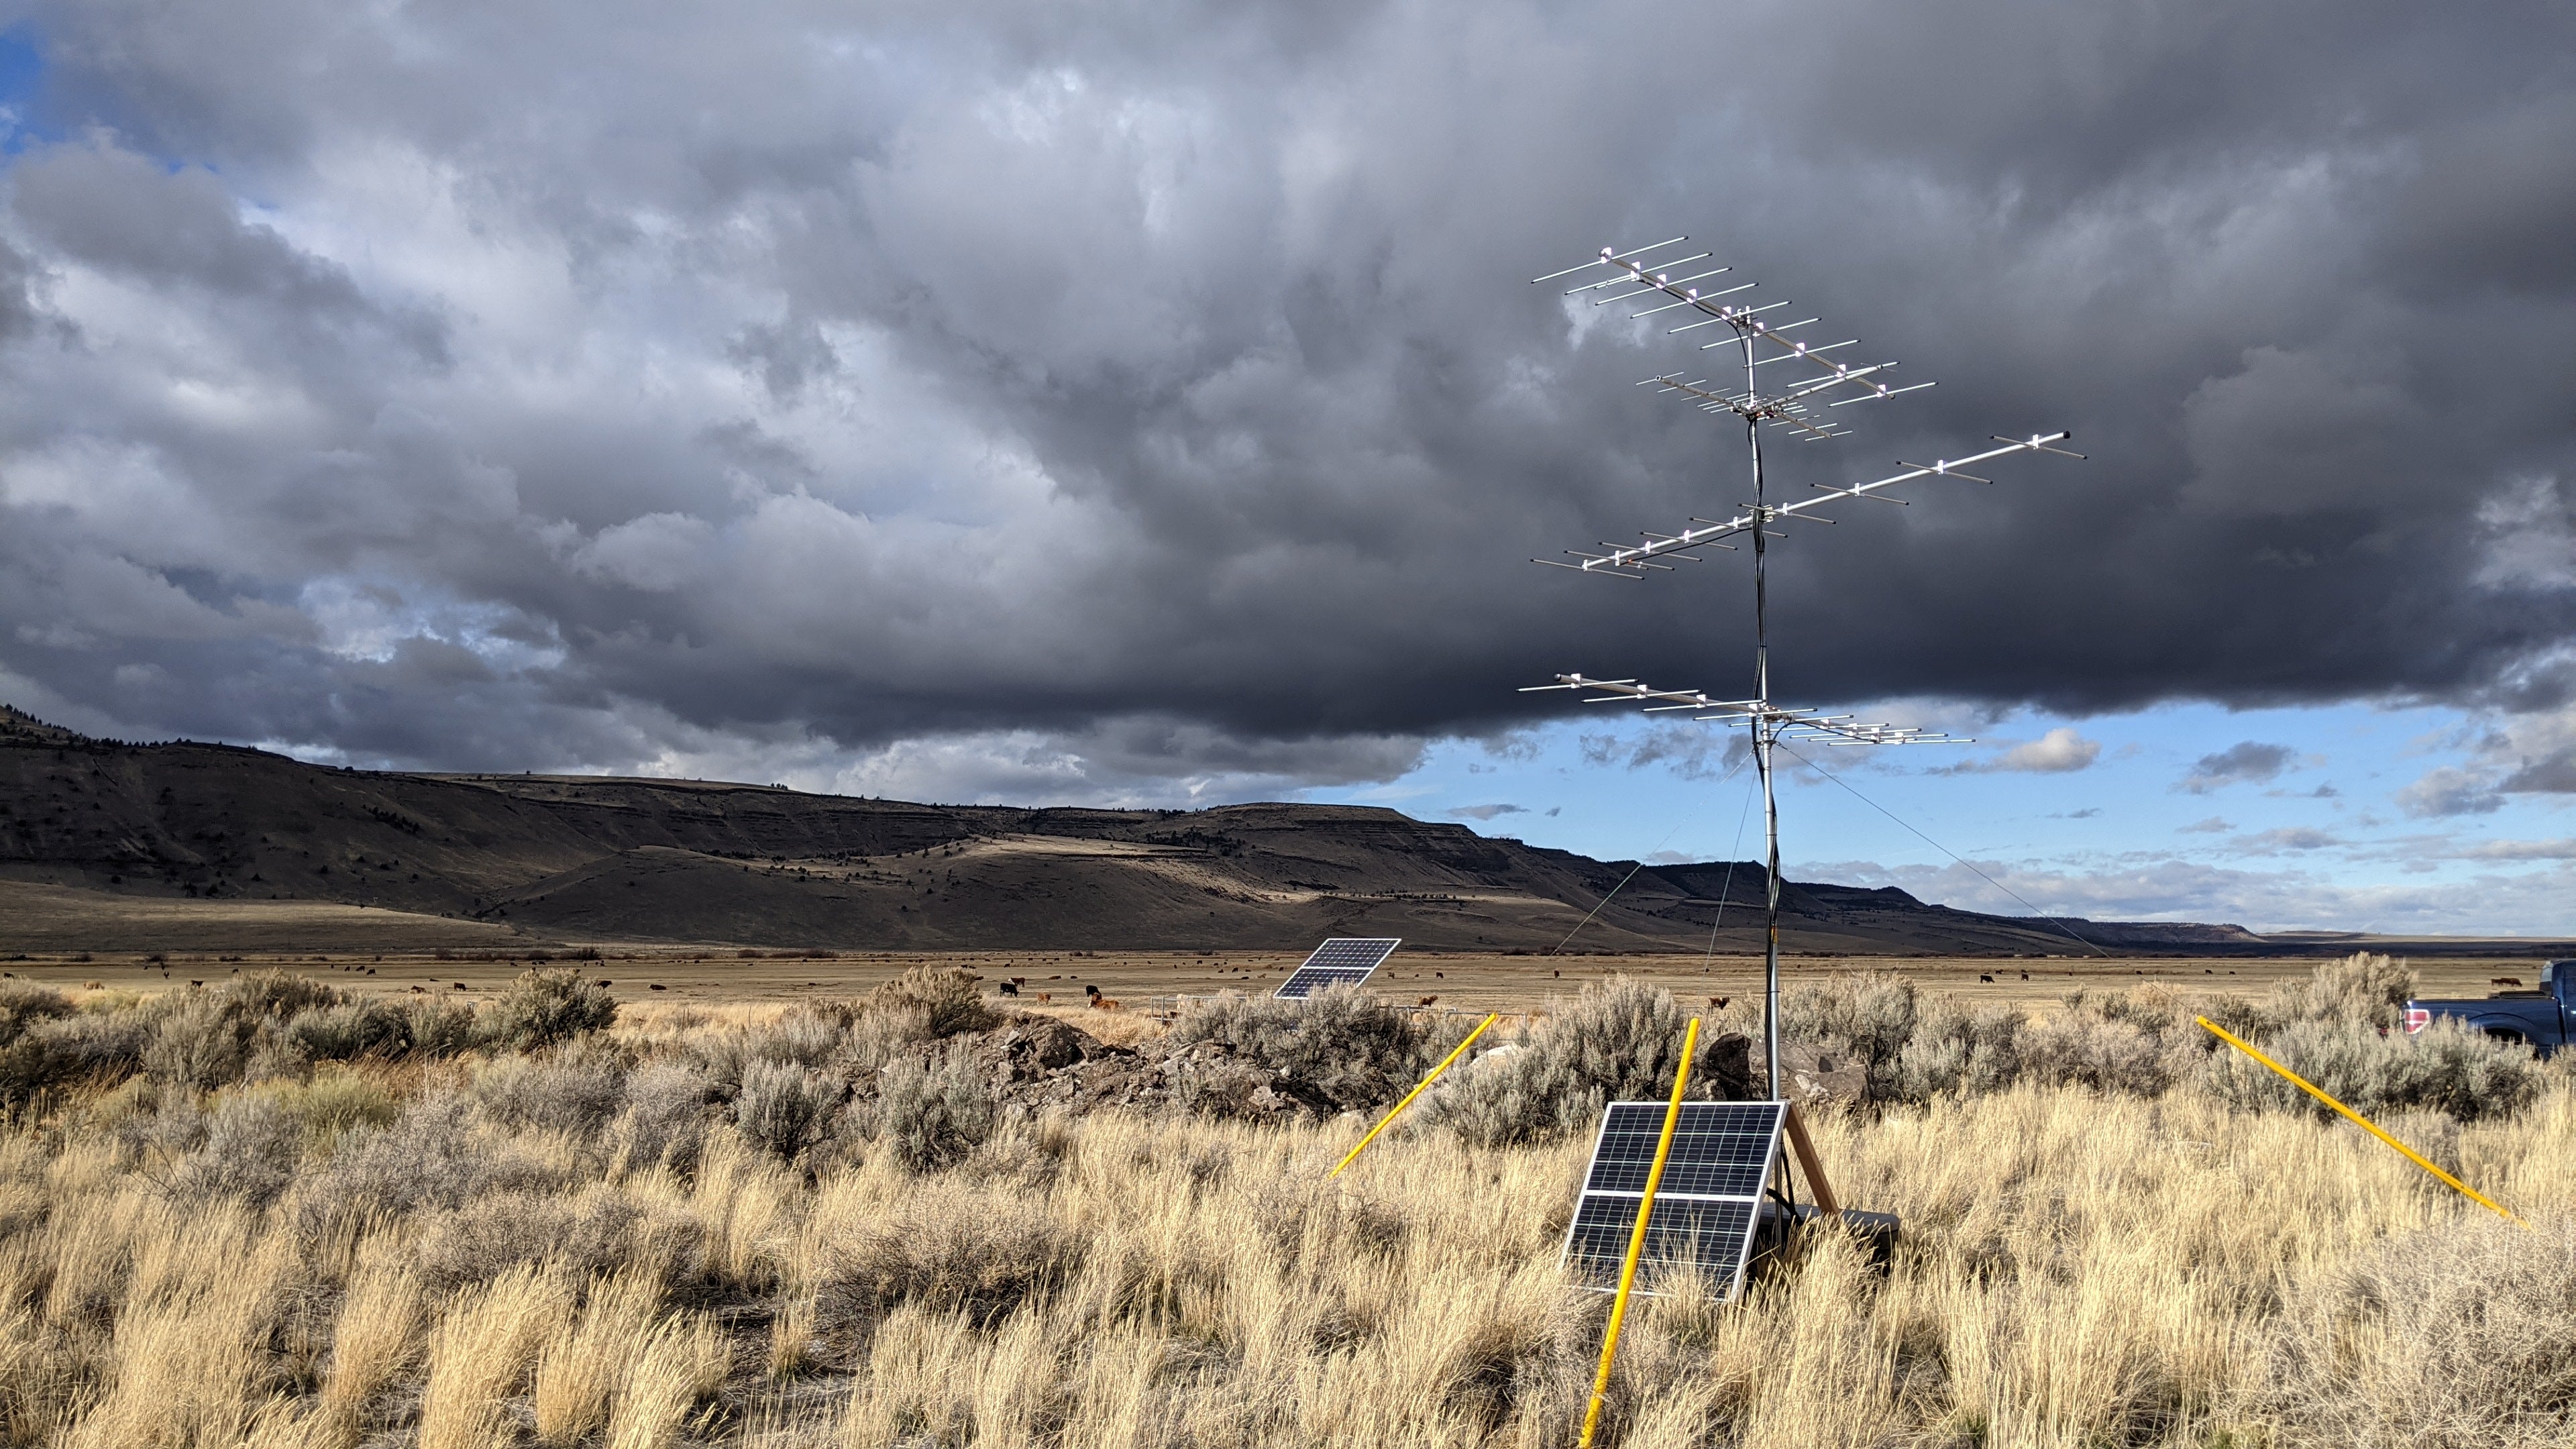 A landscape view of grassy open habitat. A solar panel and antenna are in the foreground, with dramatic gray storm clouds in the background